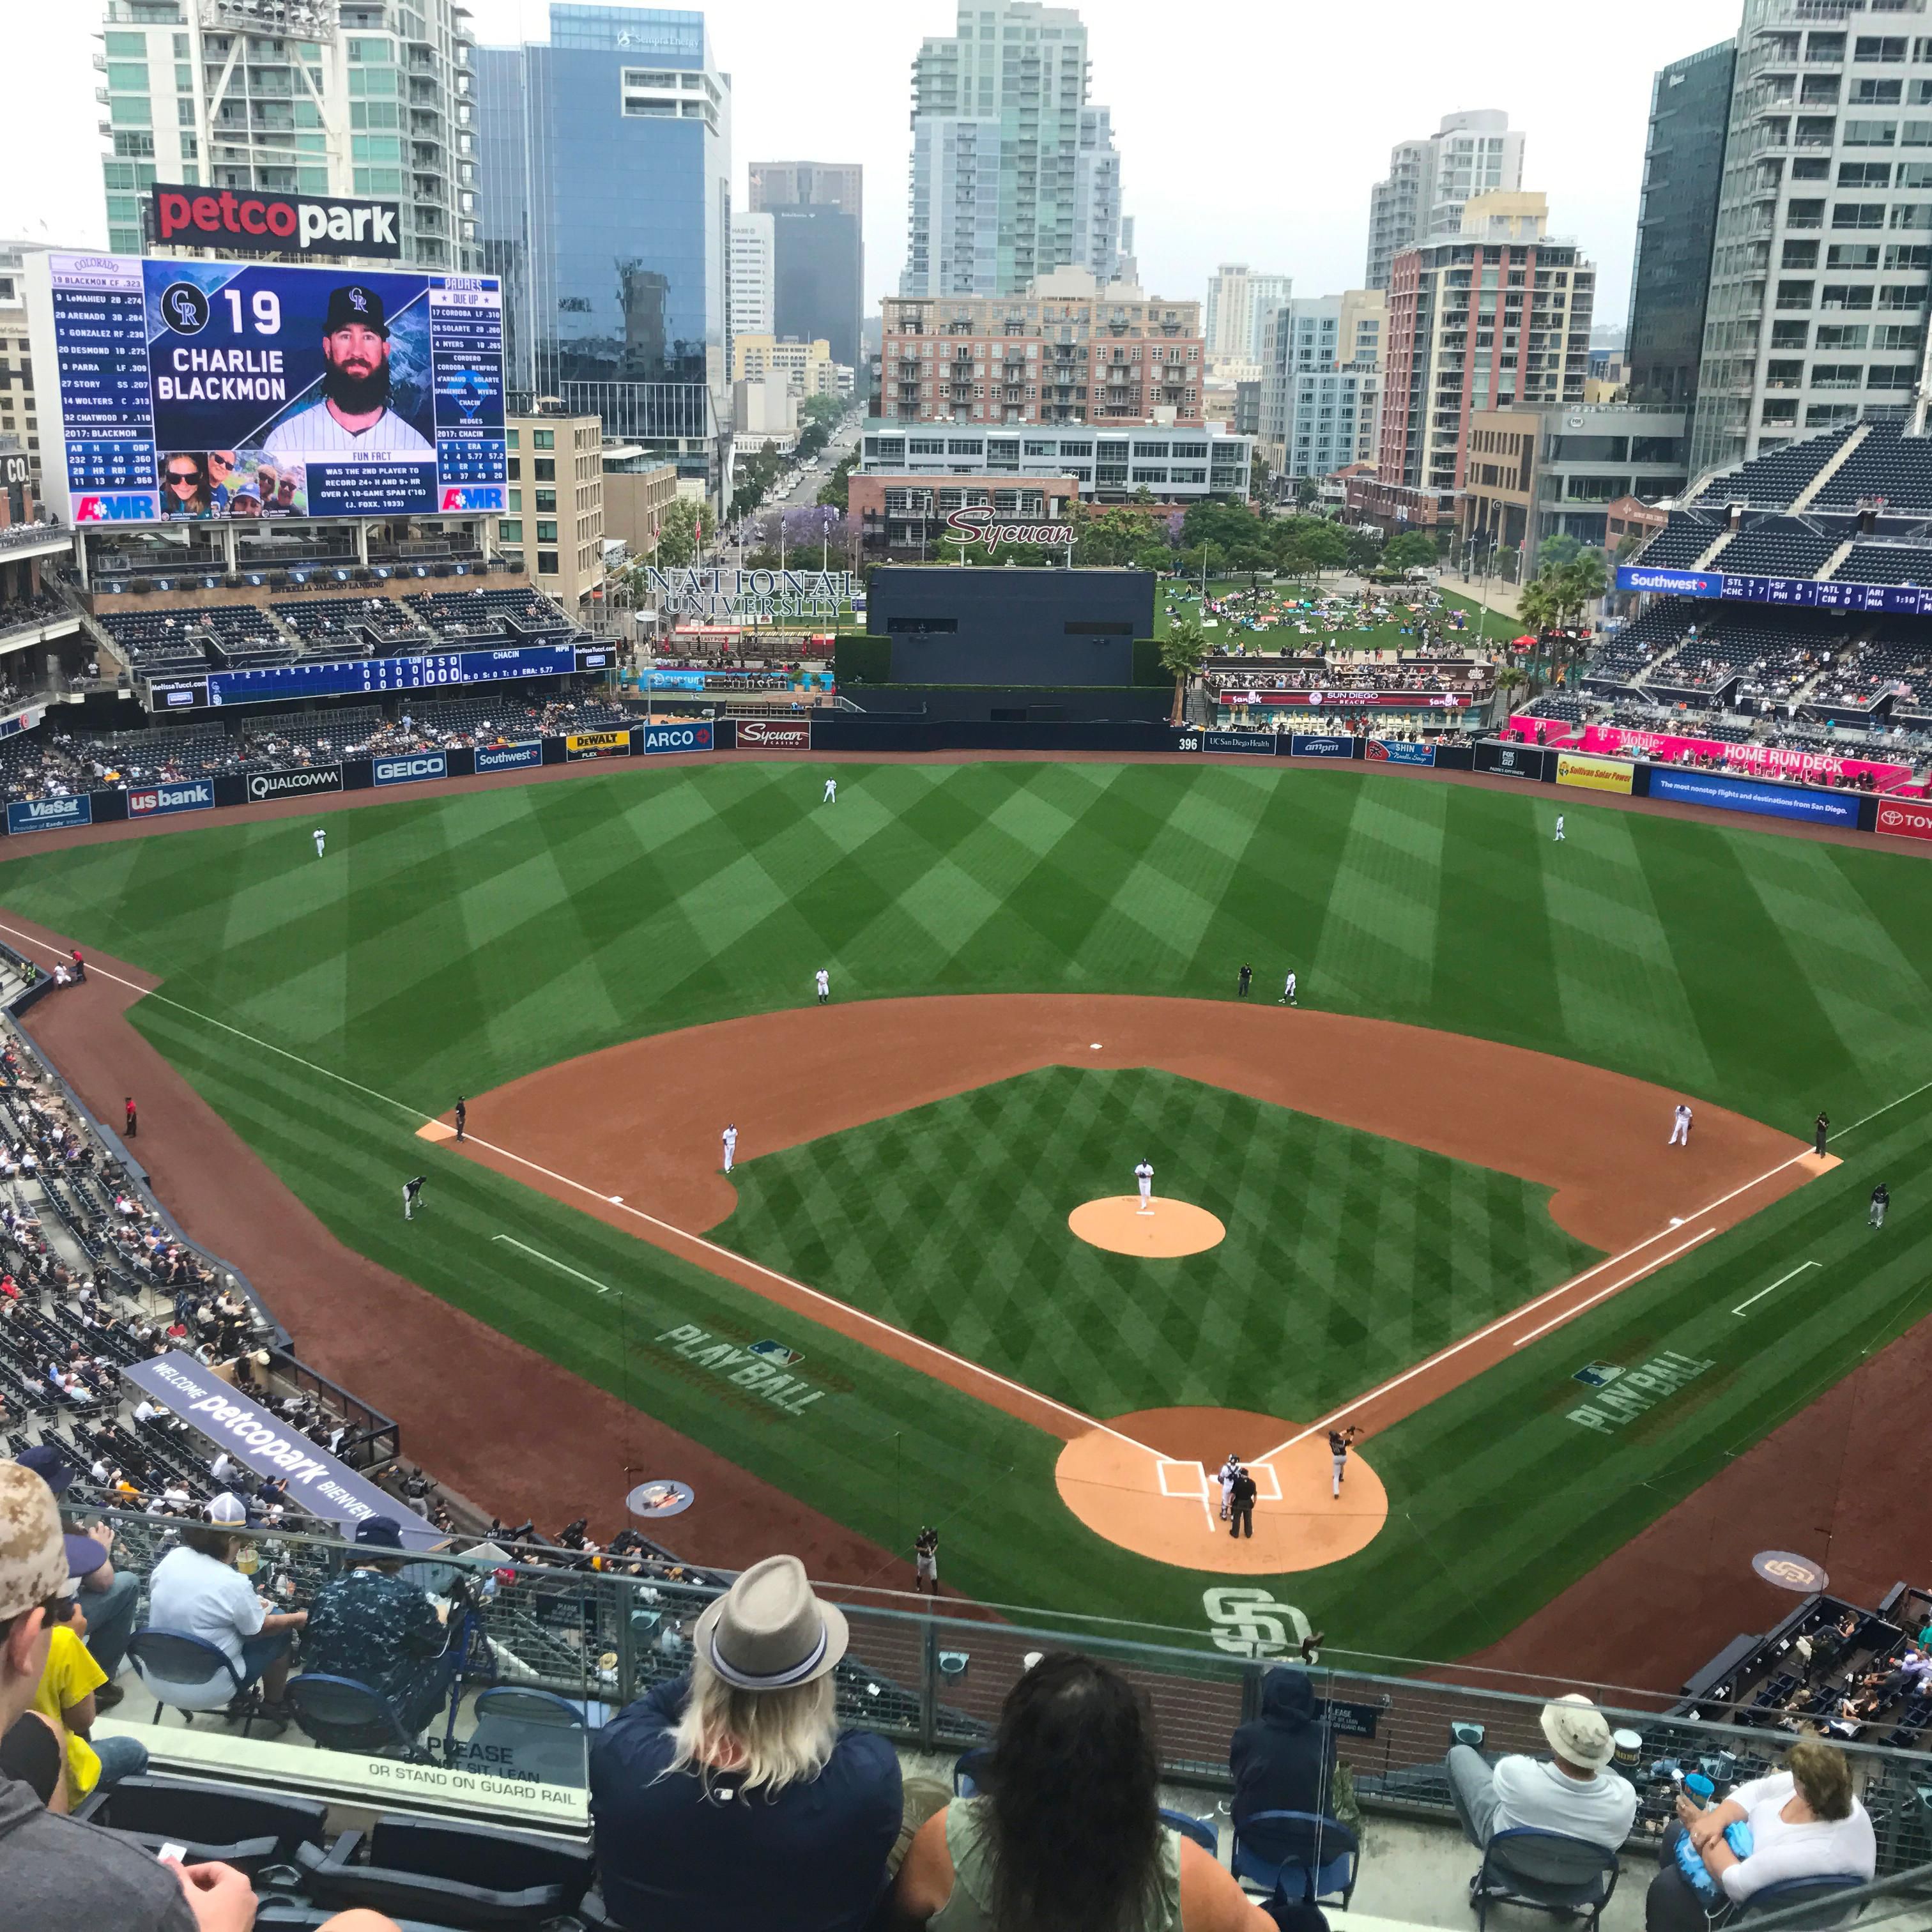 Petco Park in the heart of Downtown close to Crowne Plaza